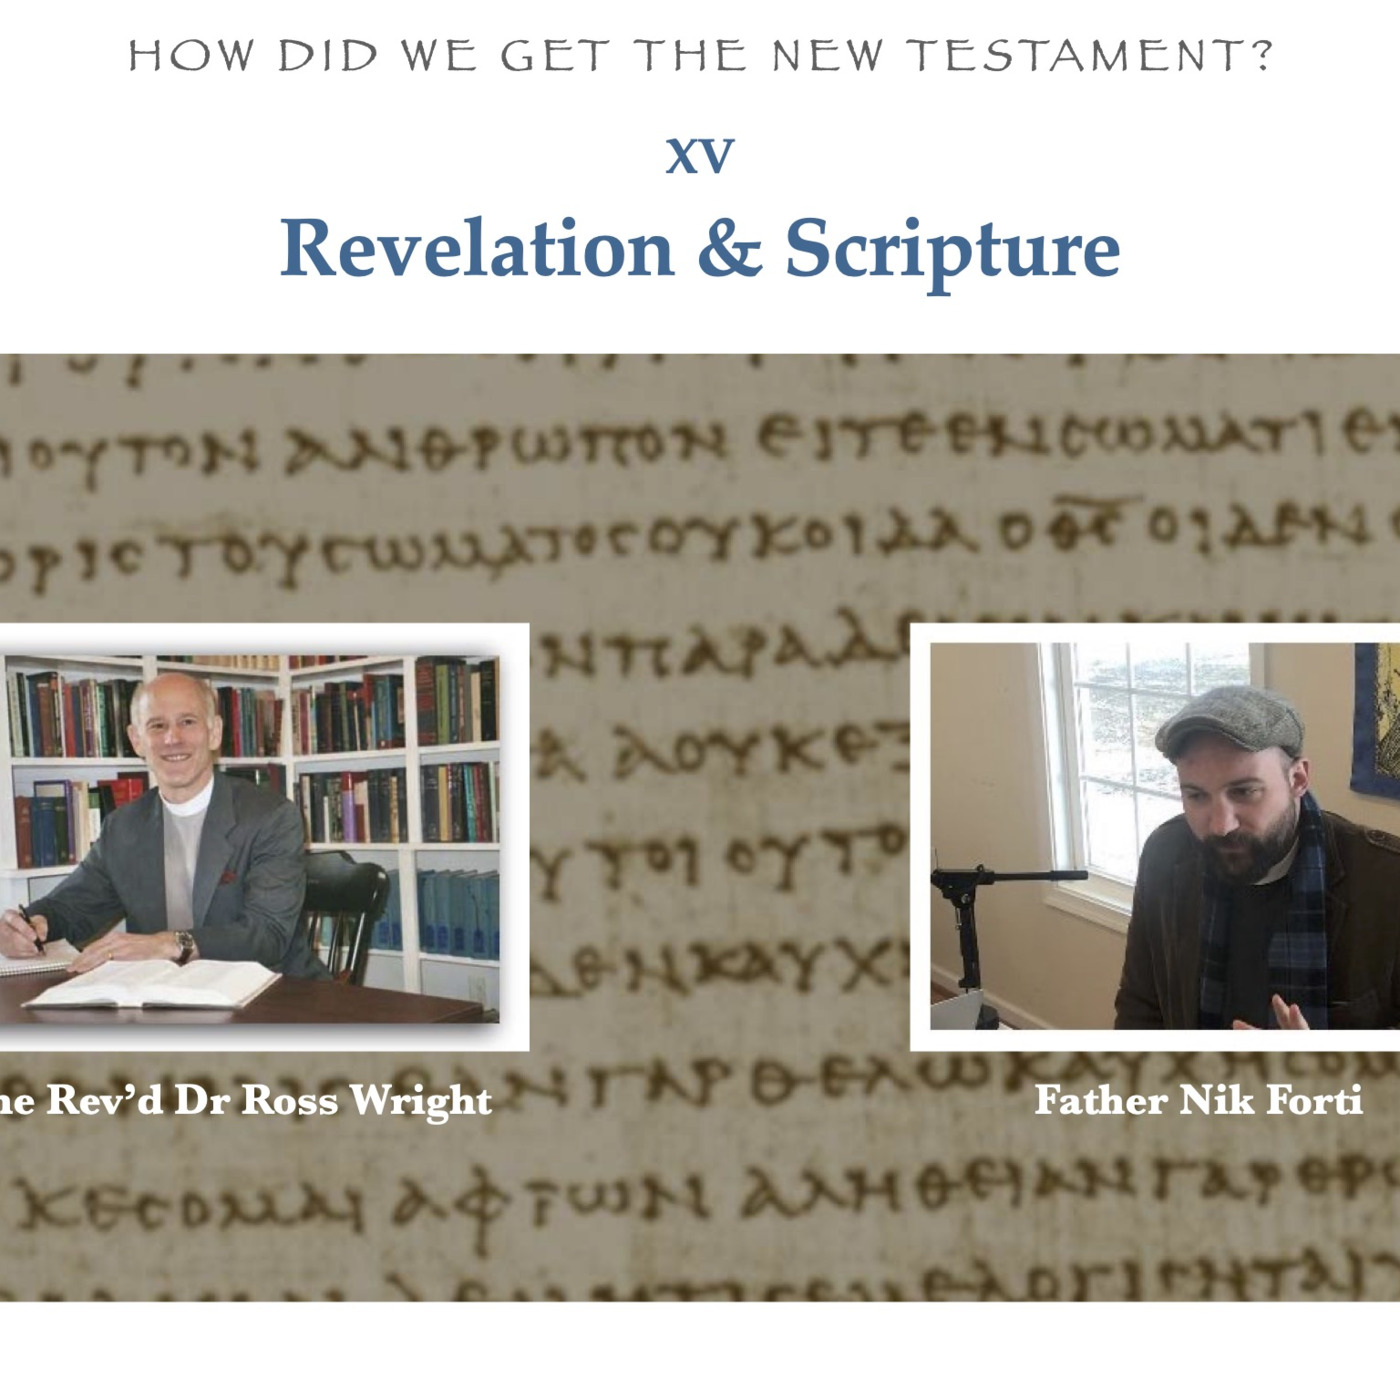 Episode 231: How Did We Get the New Testament, part 15—Hearing the Living Voice of the Word of God